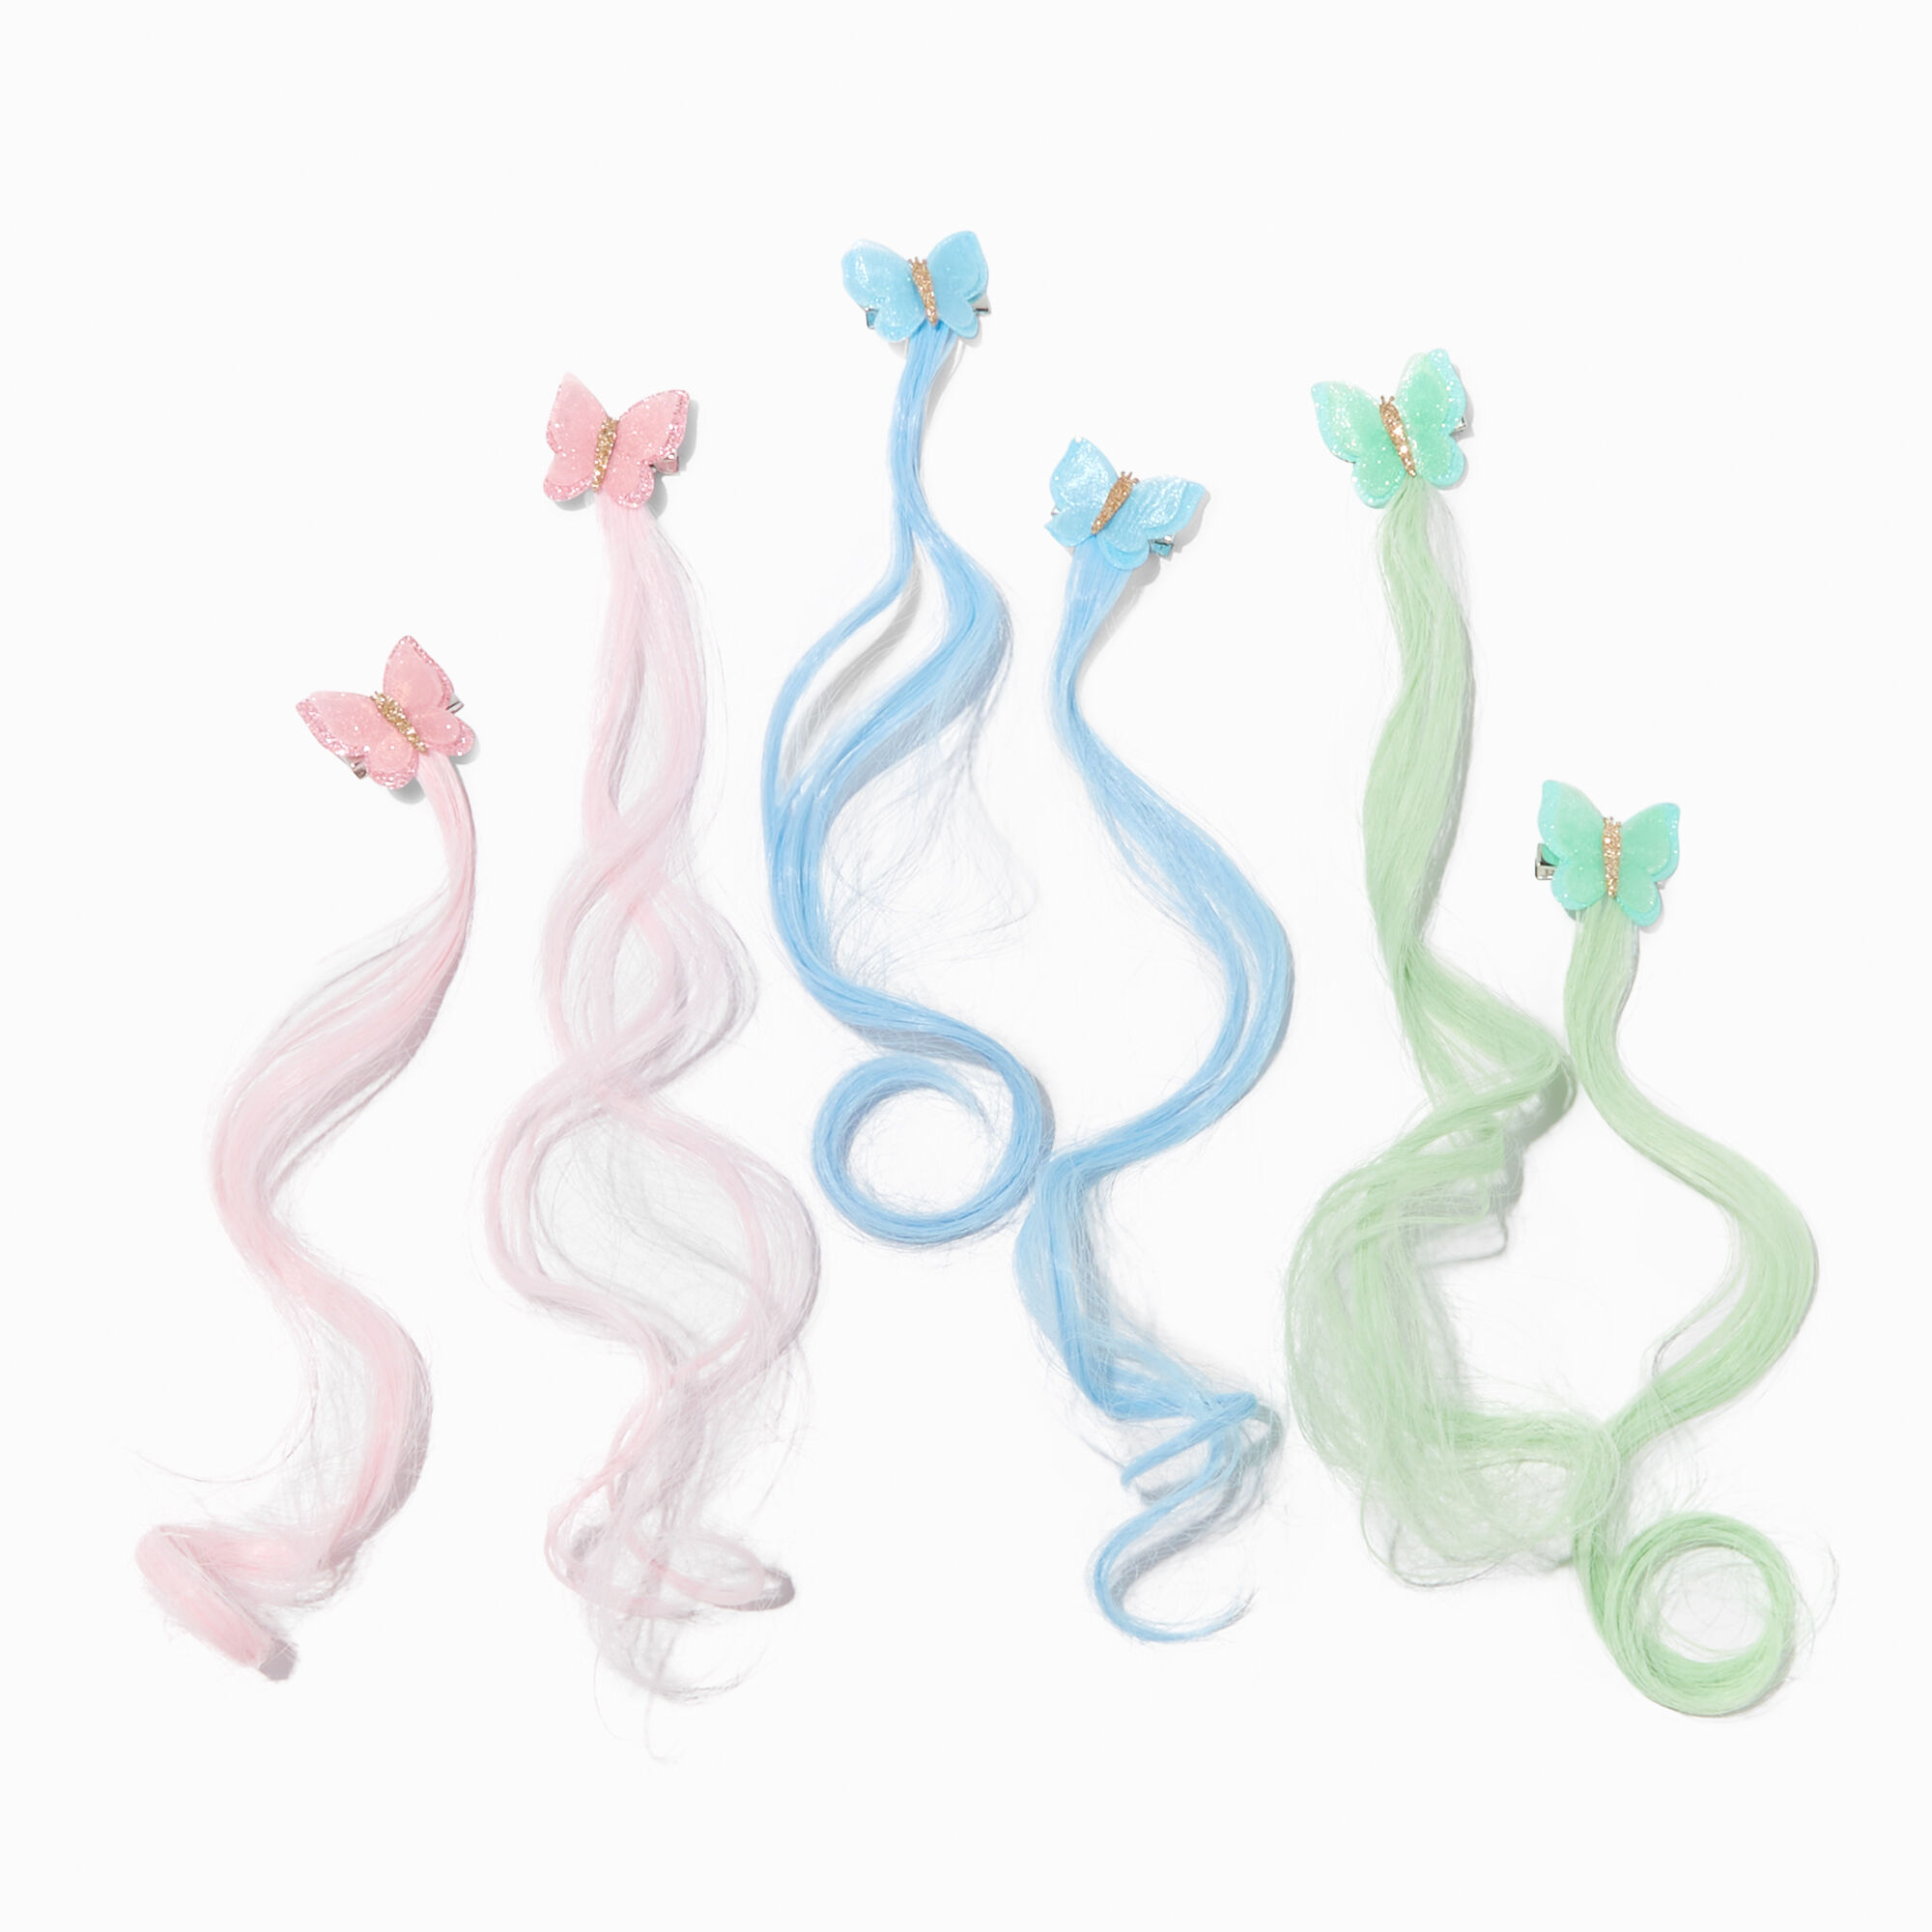 View Claires Club Faux Hair Butterfly Clips 6 Pack information